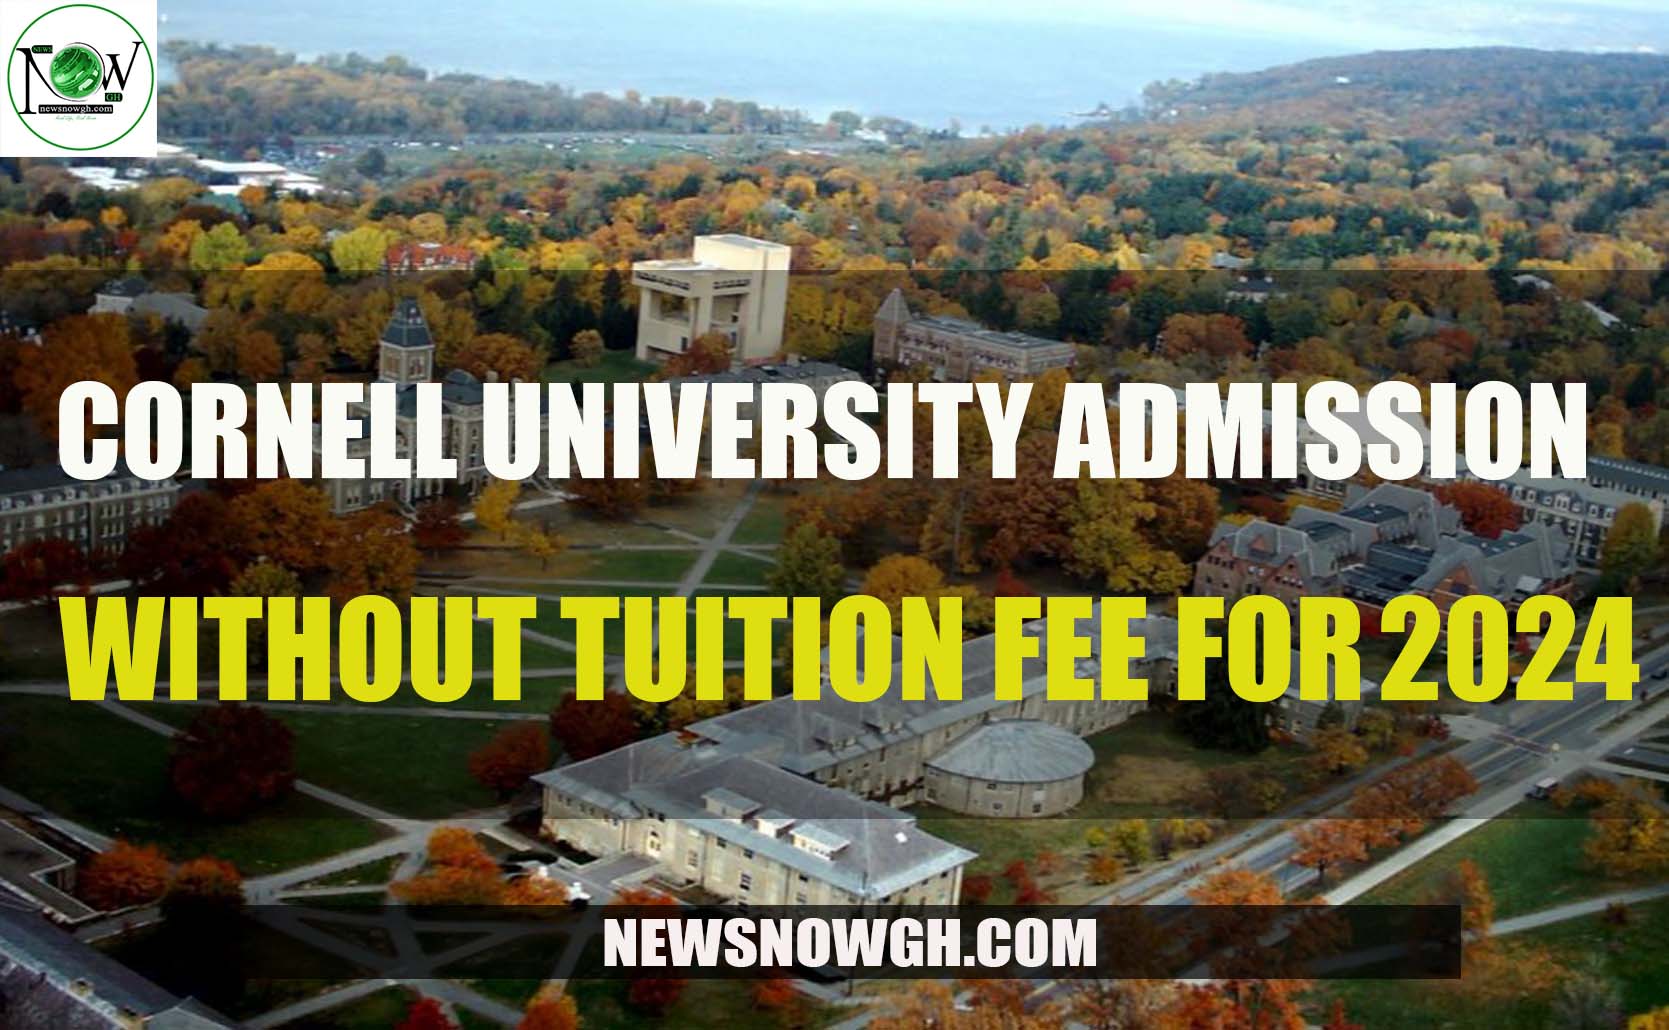 Cornell University Admissions without tuition fee for 202425